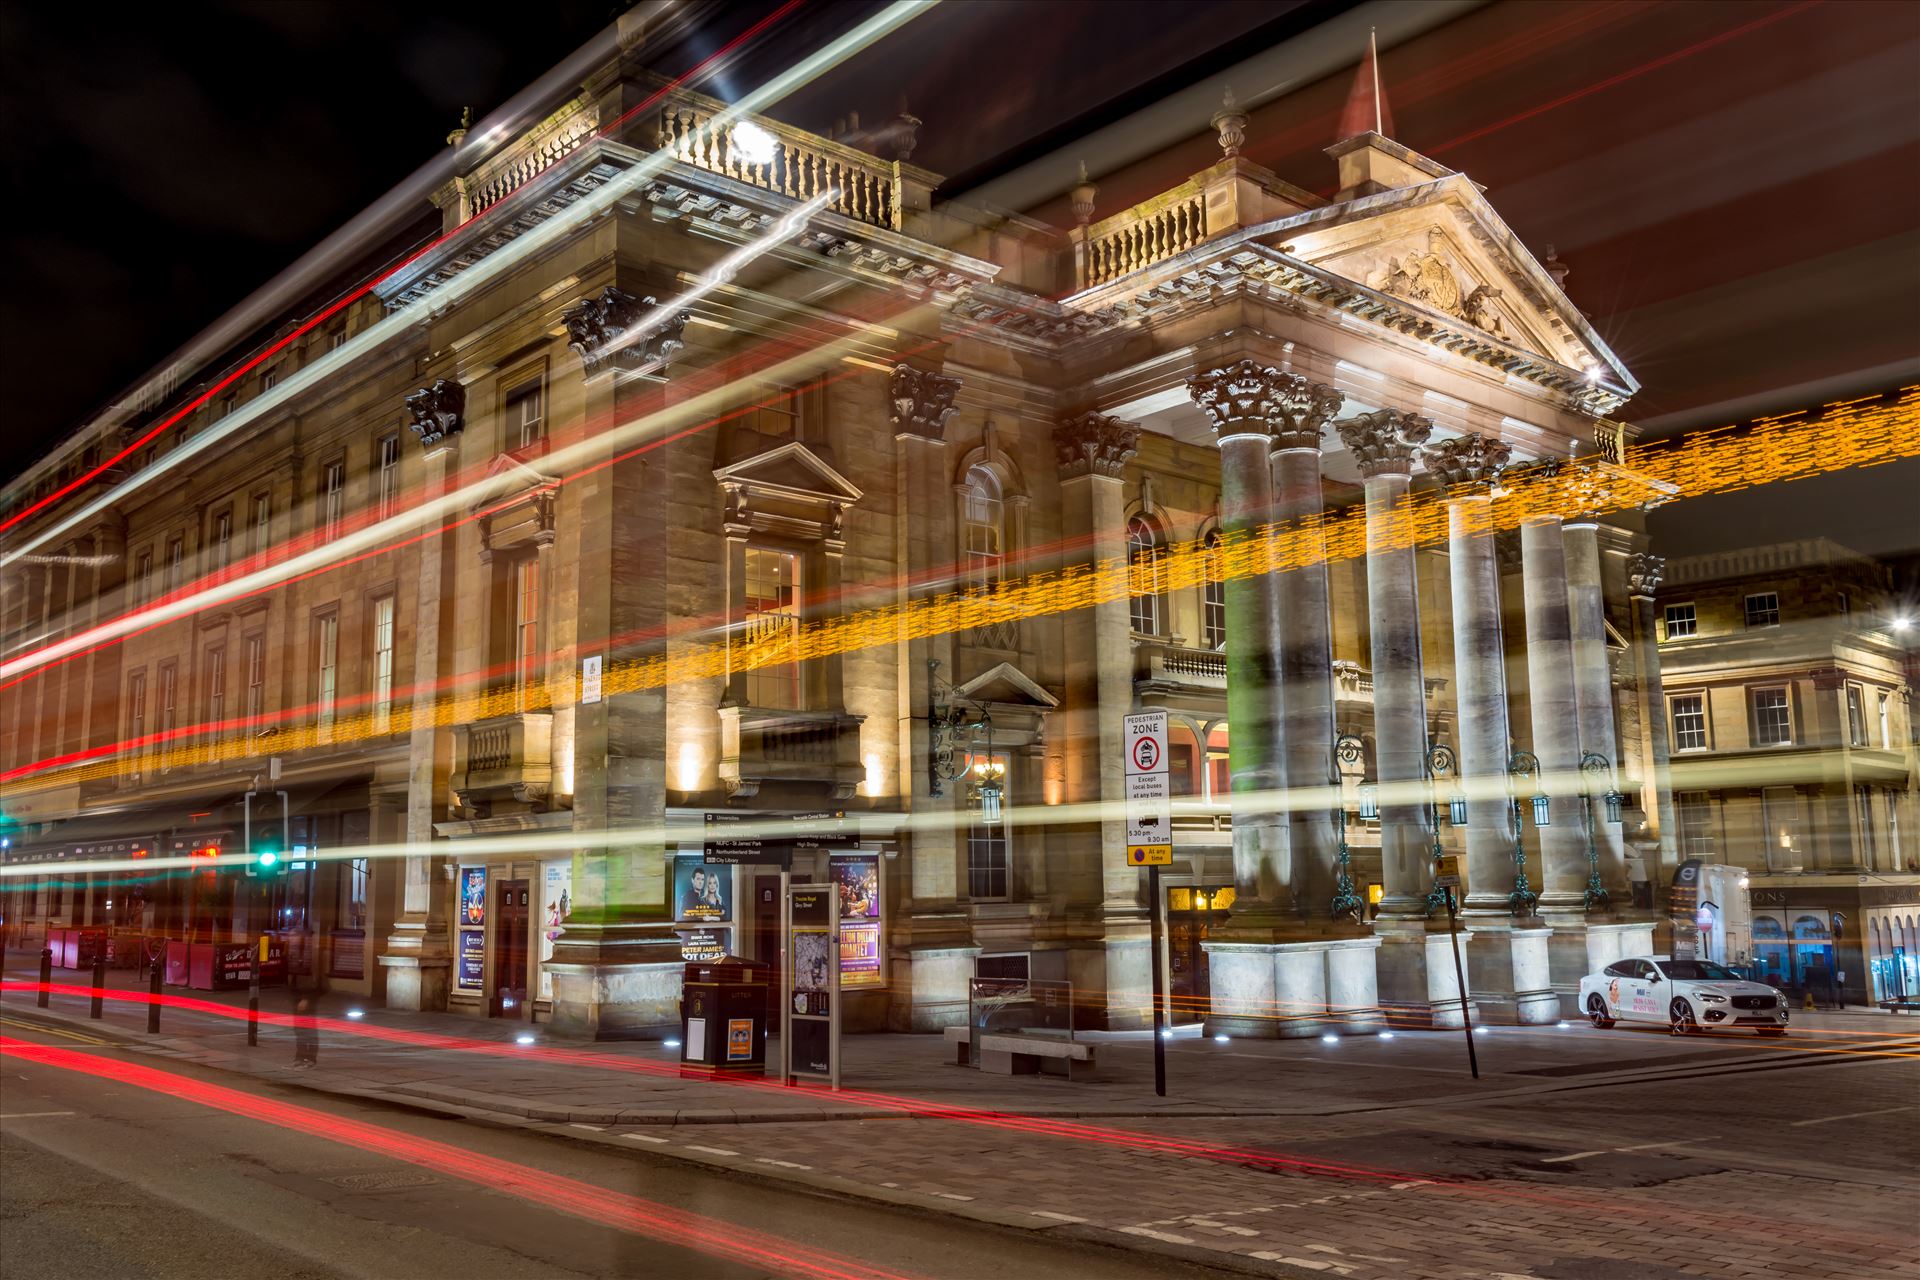 Theatre Royal, Newcastle  by philreay